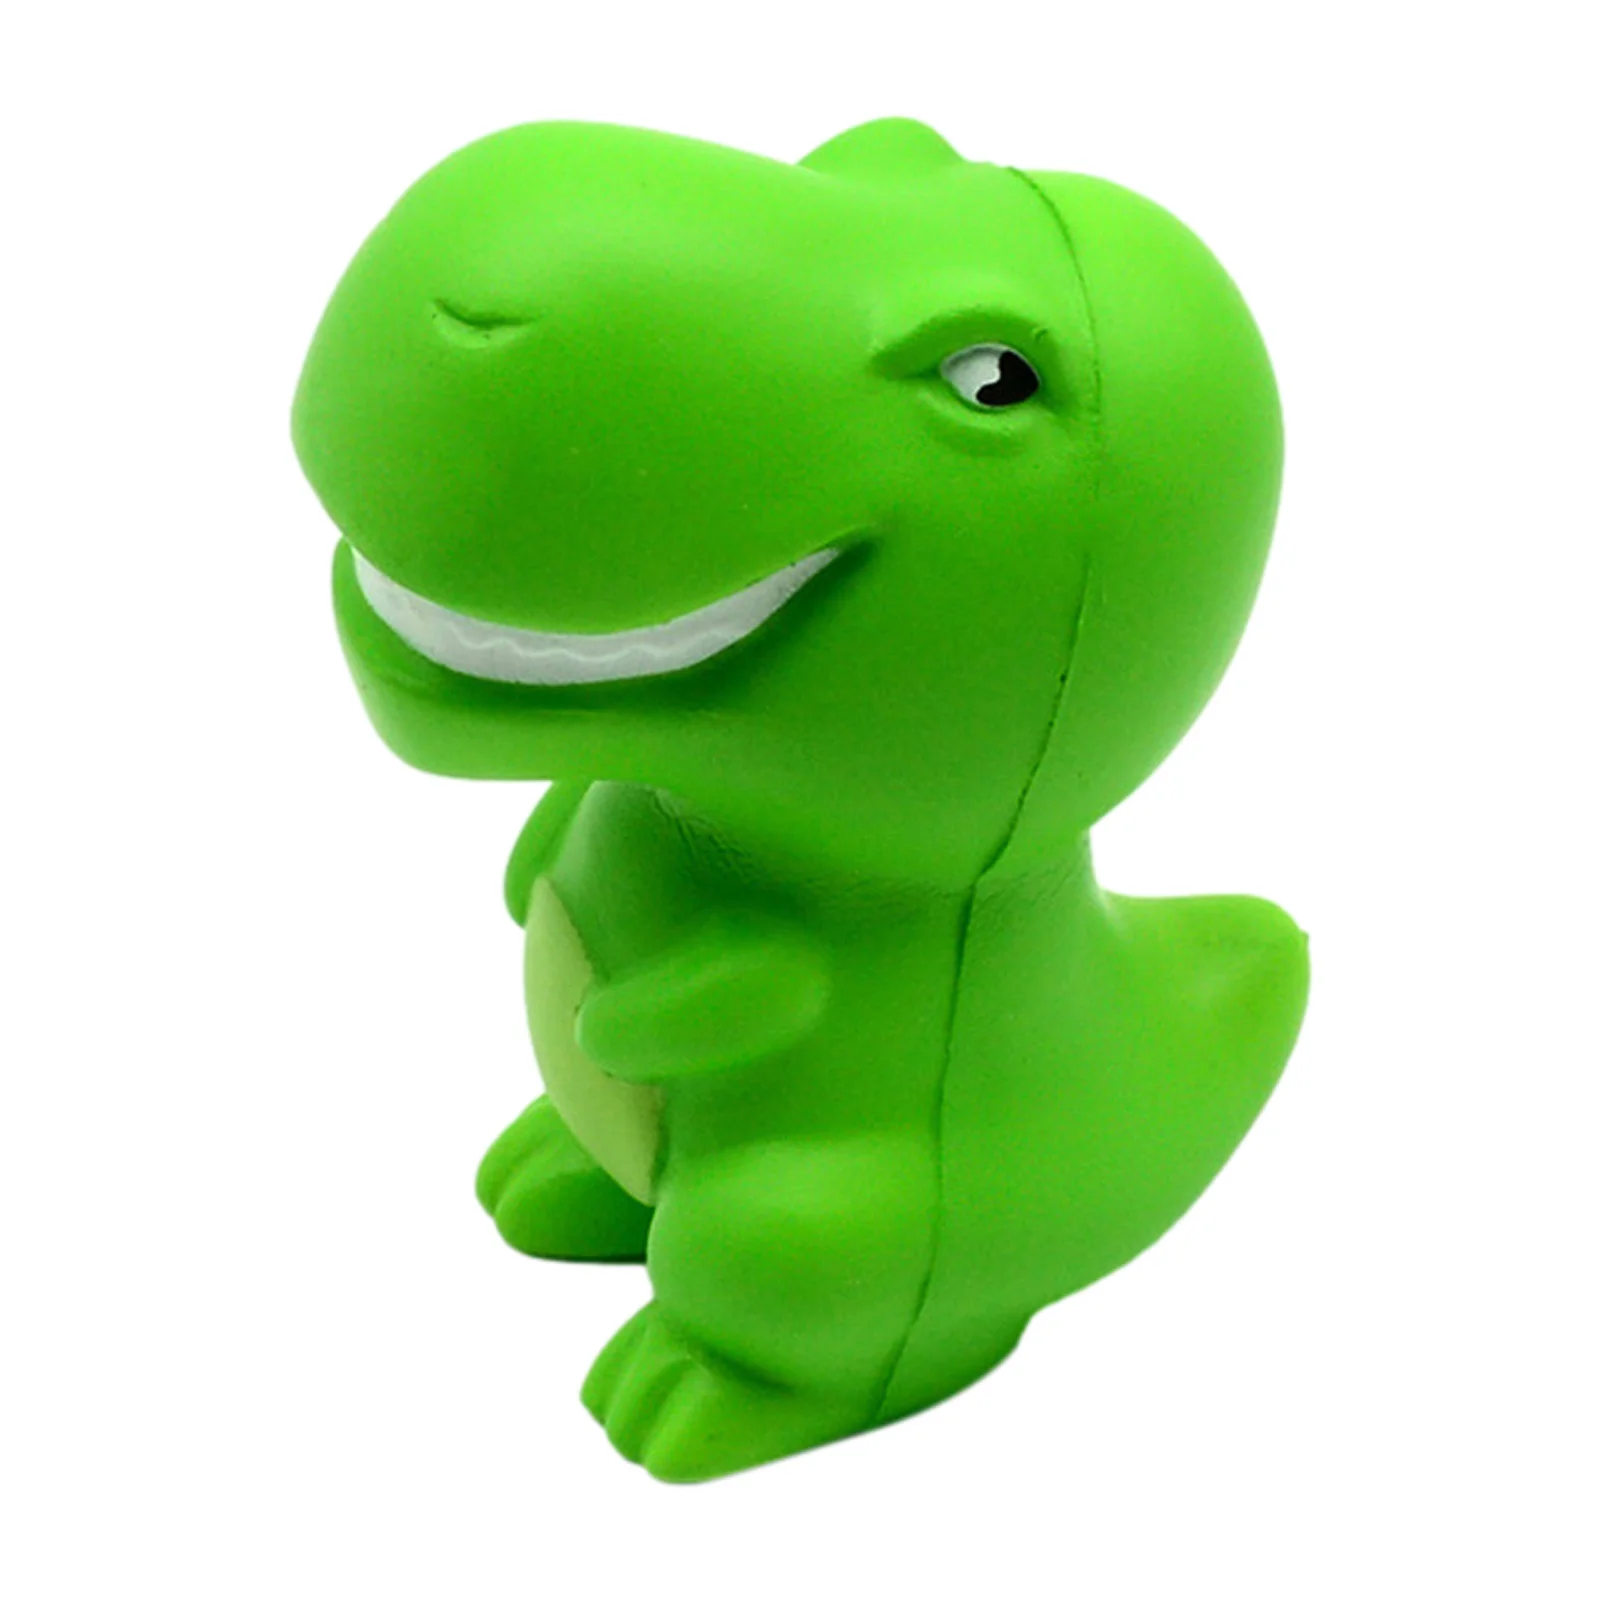 

Dinosaur Stress Relief Toys Anxiety Reliefs Squeezing Dino Toys For Boys Girls Adults Fidgets Sensory Tyrannosaurus Rex Toy